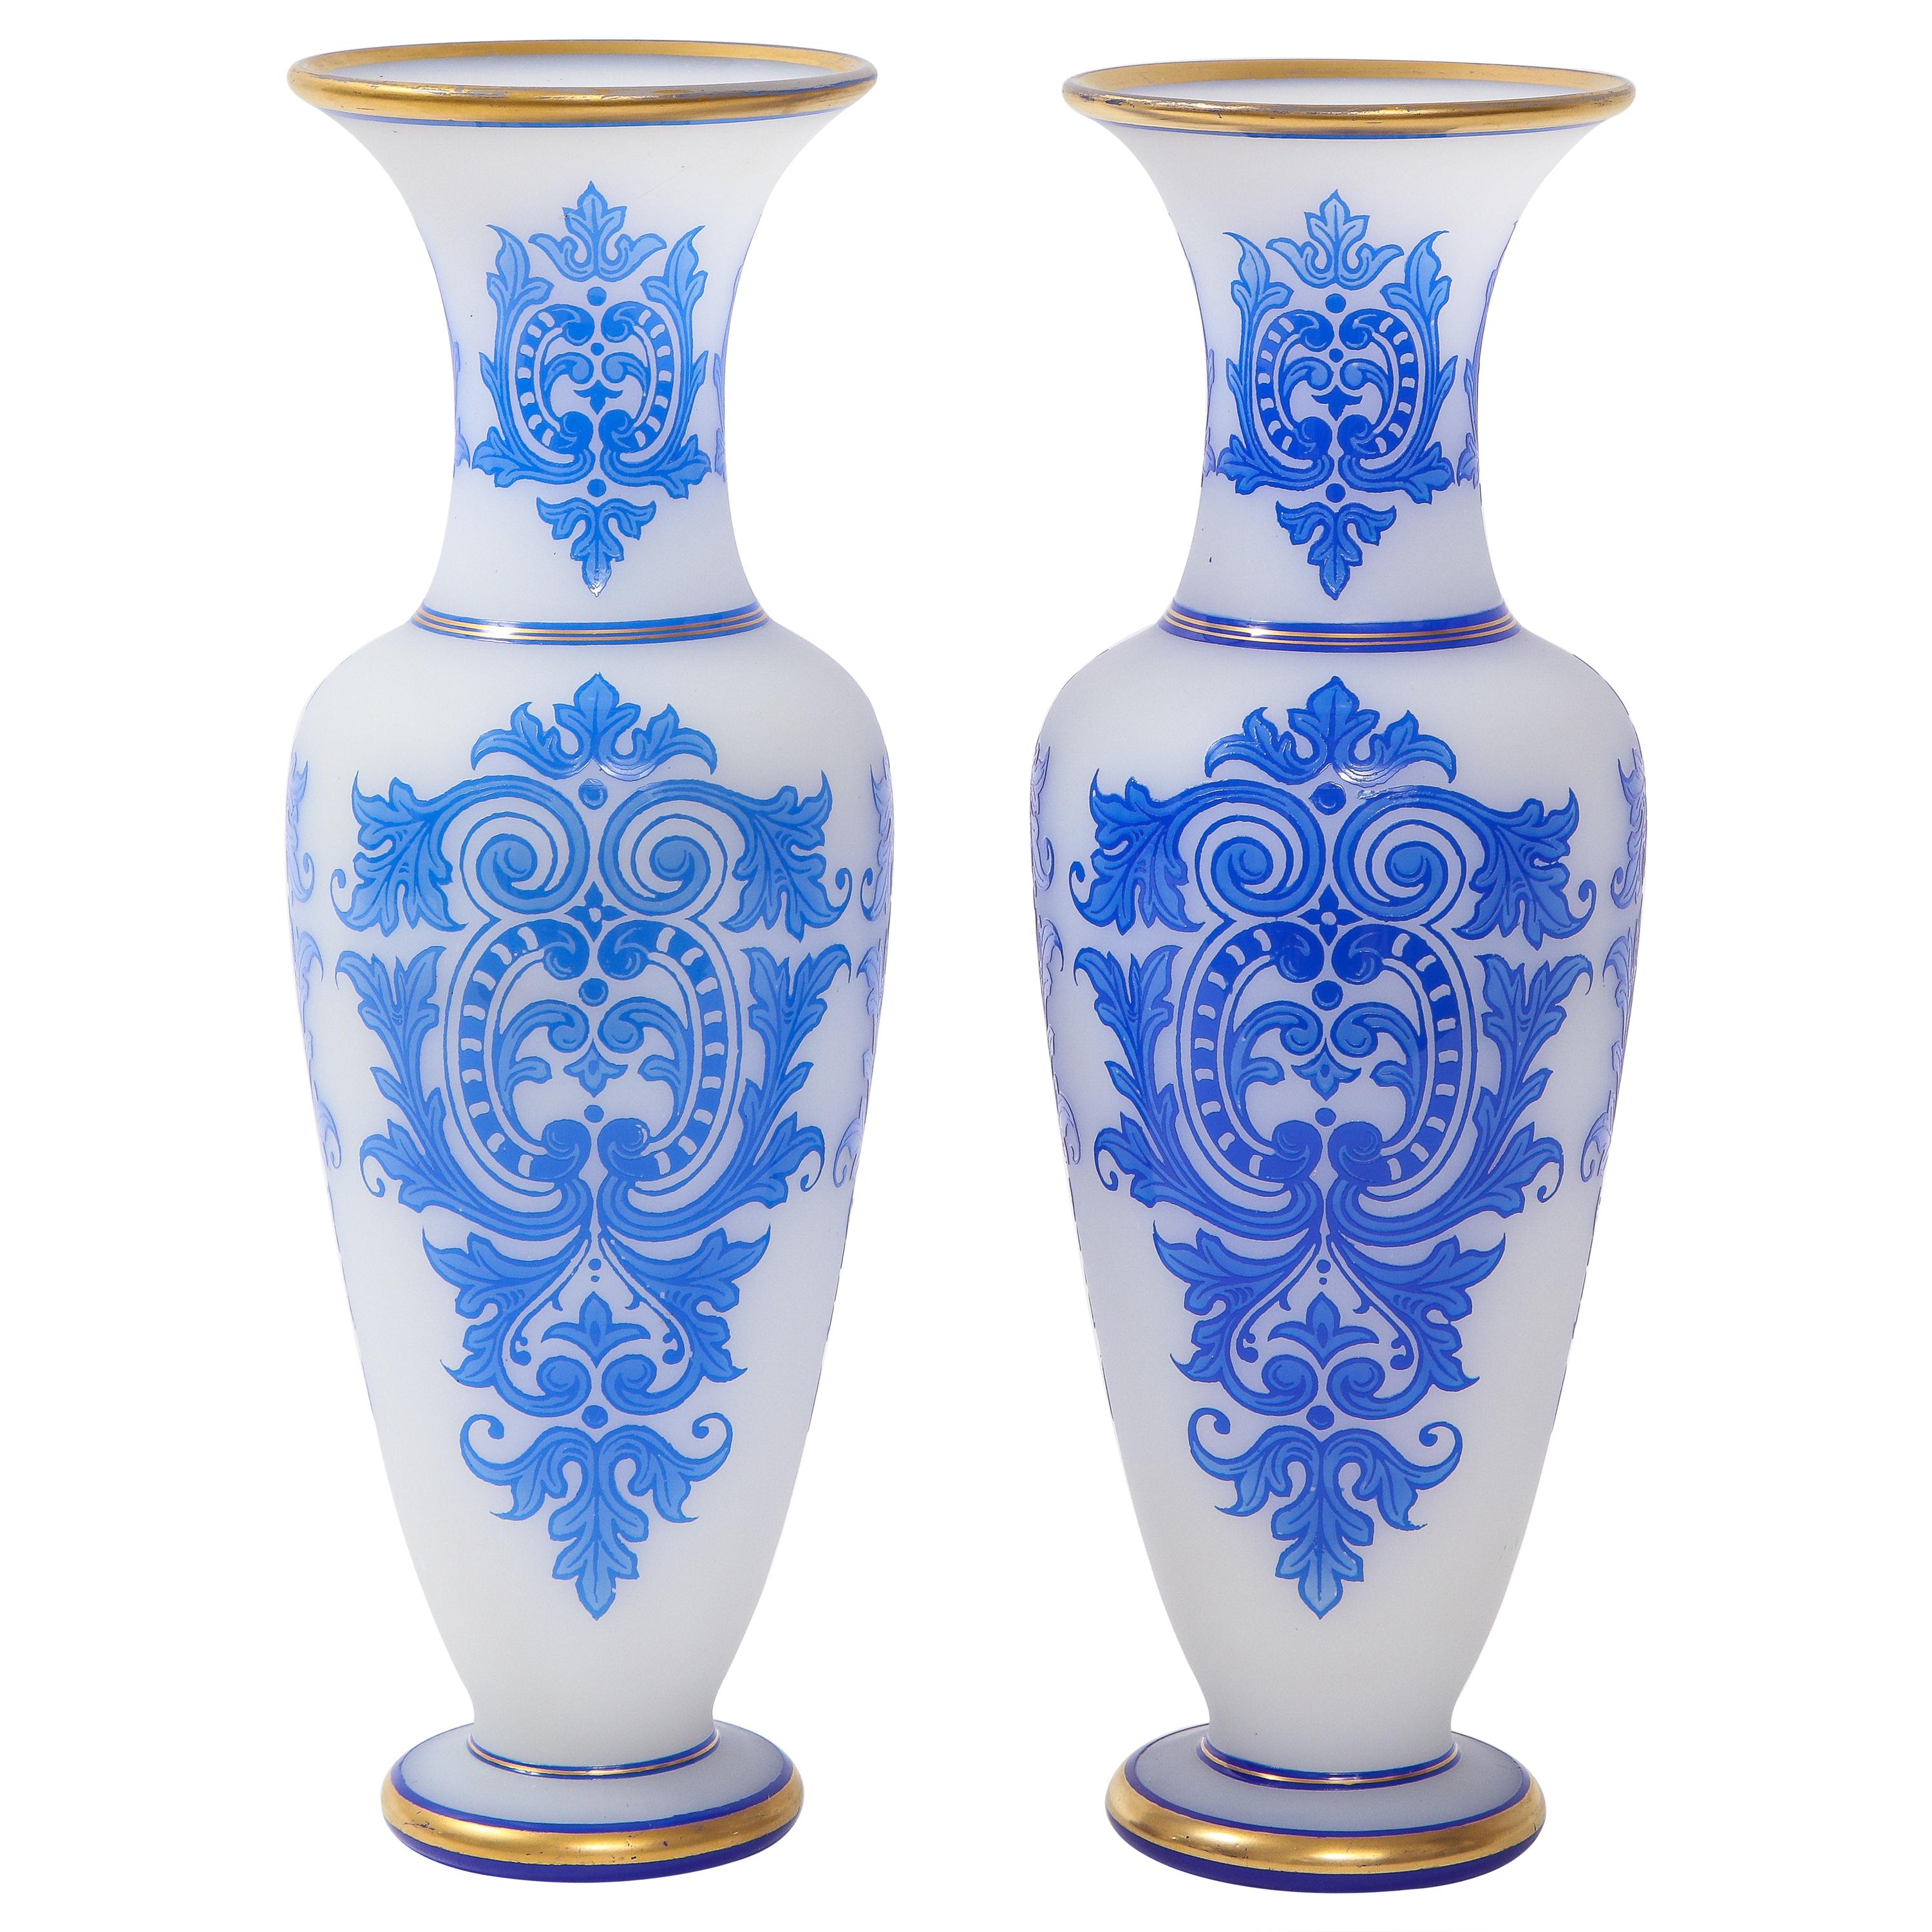 Pair of Baccarat Double Overlay Blue Over White Opaline Vases w/ 24k Gold Decor